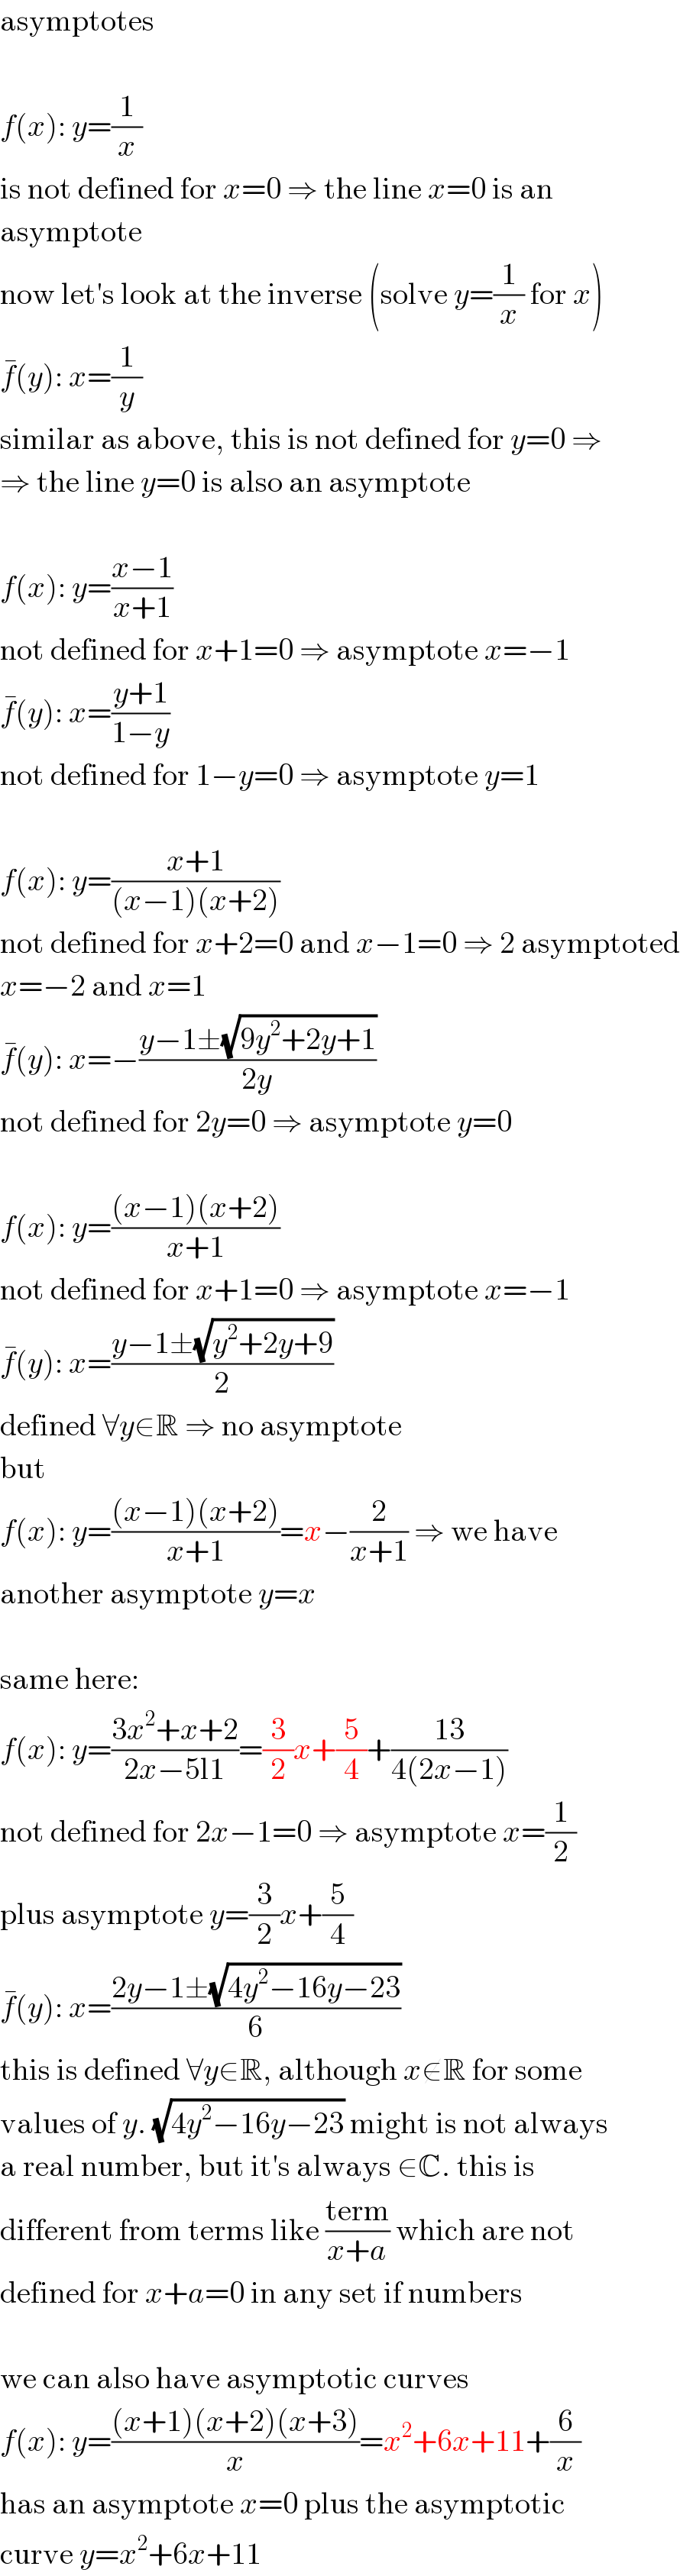 asymptotes    f(x): y=(1/x)  is not defined for x=0 ⇒ the line x=0 is an  asymptote  now let′s look at the inverse (solve y=(1/x) for x)  f^� (y): x=(1/y)  similar as above, this is not defined for y=0 ⇒  ⇒ the line y=0 is also an asymptote    f(x): y=((x−1)/(x+1))  not defined for x+1=0 ⇒ asymptote x=−1  f^� (y): x=((y+1)/(1−y))  not defined for 1−y=0 ⇒ asymptote y=1    f(x): y=((x+1)/((x−1)(x+2)))  not defined for x+2=0 and x−1=0 ⇒ 2 asymptoted  x=−2 and x=1  f^� (y): x=−((y−1±(√(9y^2 +2y+1)))/(2y))  not defined for 2y=0 ⇒ asymptote y=0    f(x): y=(((x−1)(x+2))/(x+1))  not defined for x+1=0 ⇒ asymptote x=−1  f^� (y): x=((y−1±(√(y^2 +2y+9)))/2)  defined ∀y∈R ⇒ no asymptote  but  f(x): y=(((x−1)(x+2))/(x+1))=x−(2/(x+1)) ⇒ we have  another asymptote y=x    same here:  f(x): y=((3x^2 +x+2)/(2x−5l1))=(3/2)x+(5/4)+((13)/(4(2x−1)))  not defined for 2x−1=0 ⇒ asymptote x=(1/2)  plus asymptote y=(3/2)x+(5/4)  f^� (y): x=((2y−1±(√(4y^2 −16y−23)))/6)  this is defined ∀y∈R, although x∉R for some  values of y. (√(4y^2 −16y−23)) might is not always  a real number, but it′s always ∈C. this is  different from terms like ((term)/(x+a)) which are not  defined for x+a=0 in any set if numbers    we can also have asymptotic curves  f(x): y=(((x+1)(x+2)(x+3))/x)=x^2 +6x+11+(6/x)  has an asymptote x=0 plus the asymptotic  curve y=x^2 +6x+11  